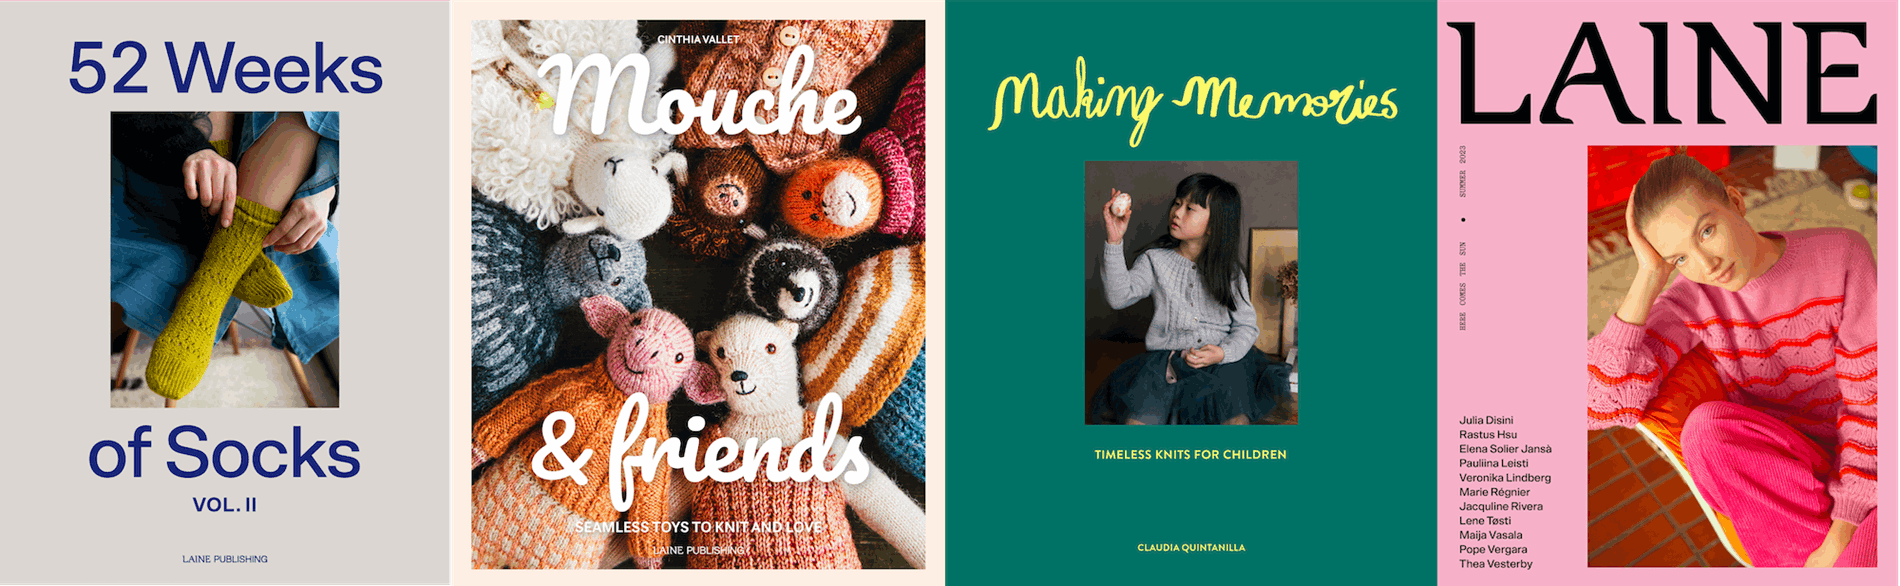 Laine Publishing - 52 Weeks of Socks, Vol. II, Mouche and Friends, Making Memories, Laine Magazine no. 17.png